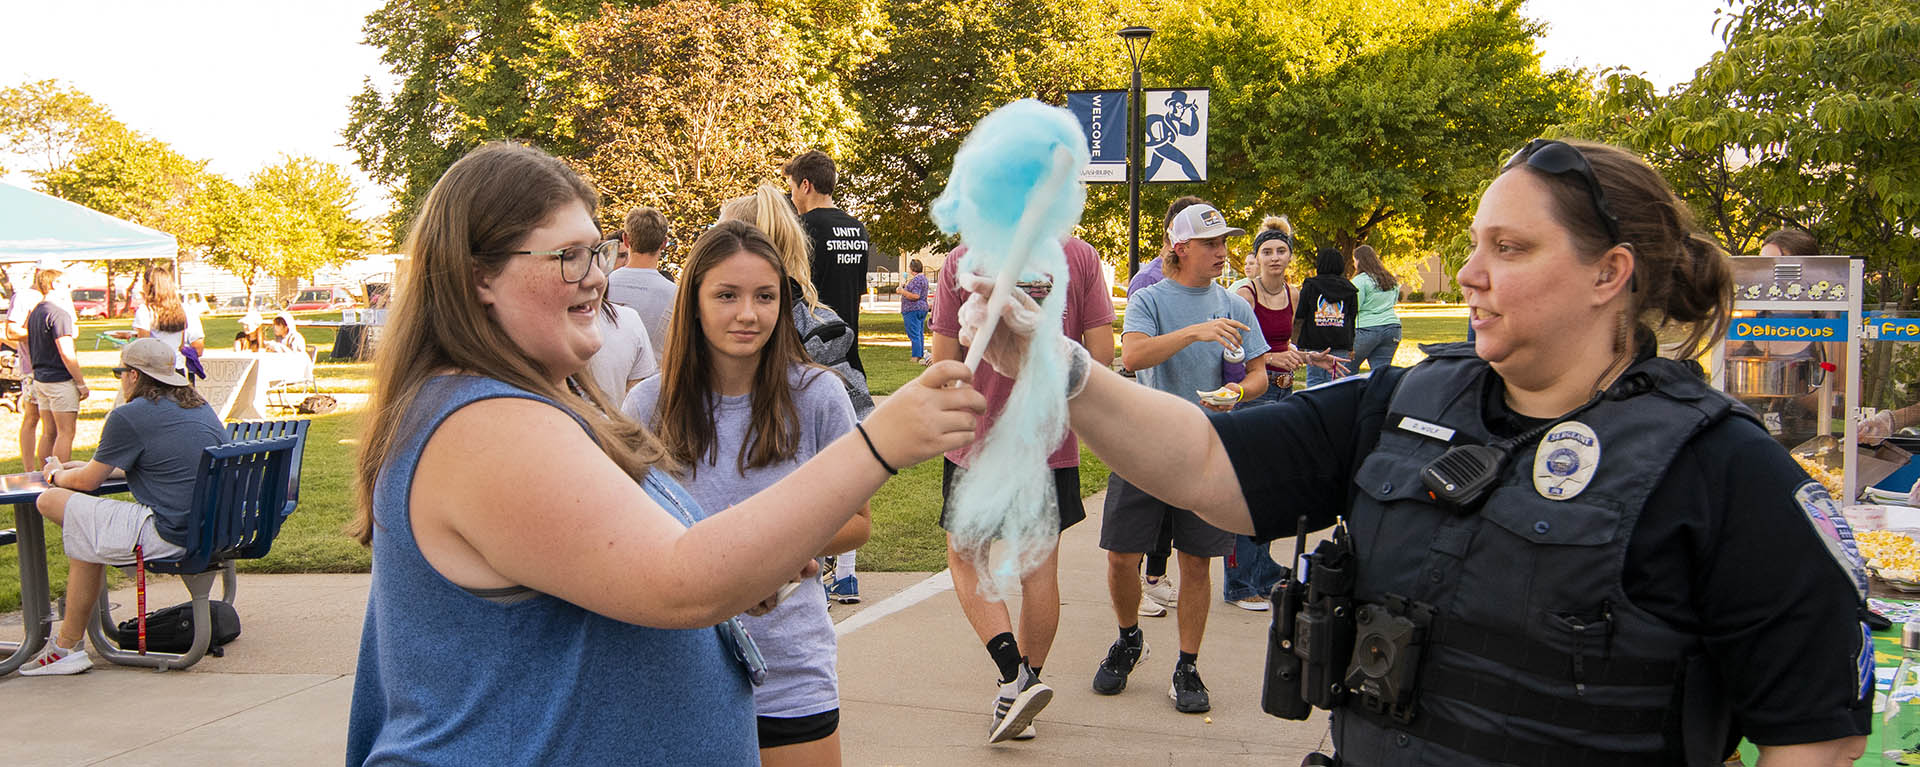 A police officer hands out cotton candy at a student event.